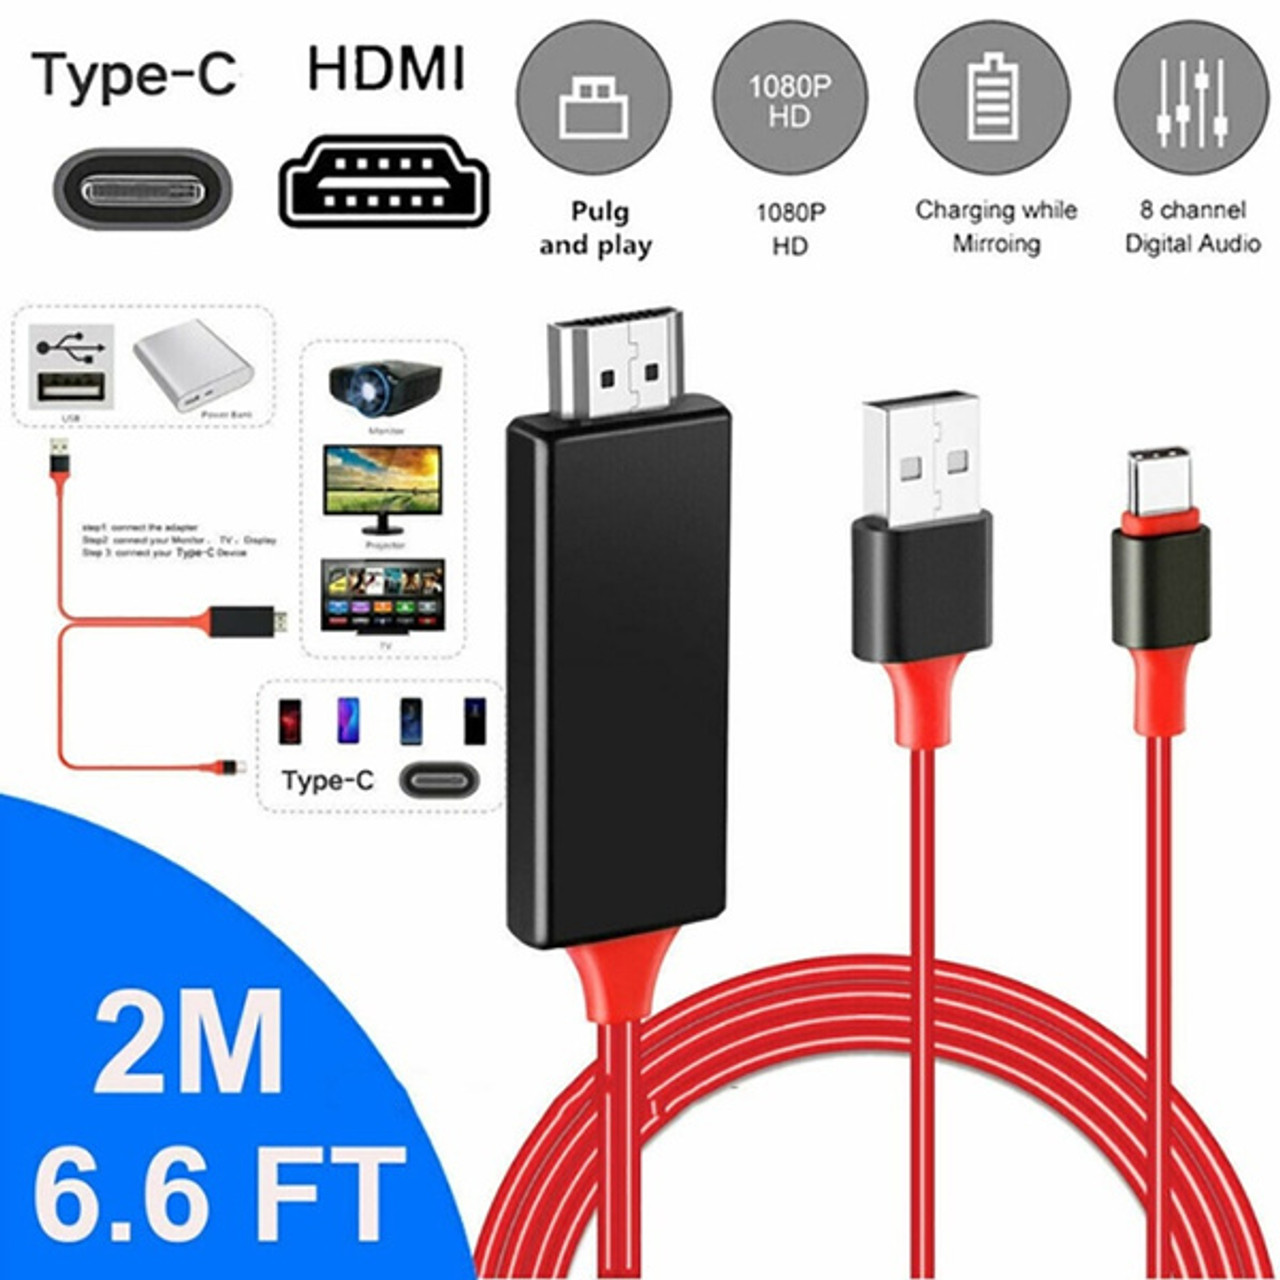 MHL USB-C Type C to HDMI USB A HD TV Cable Adapter For Android